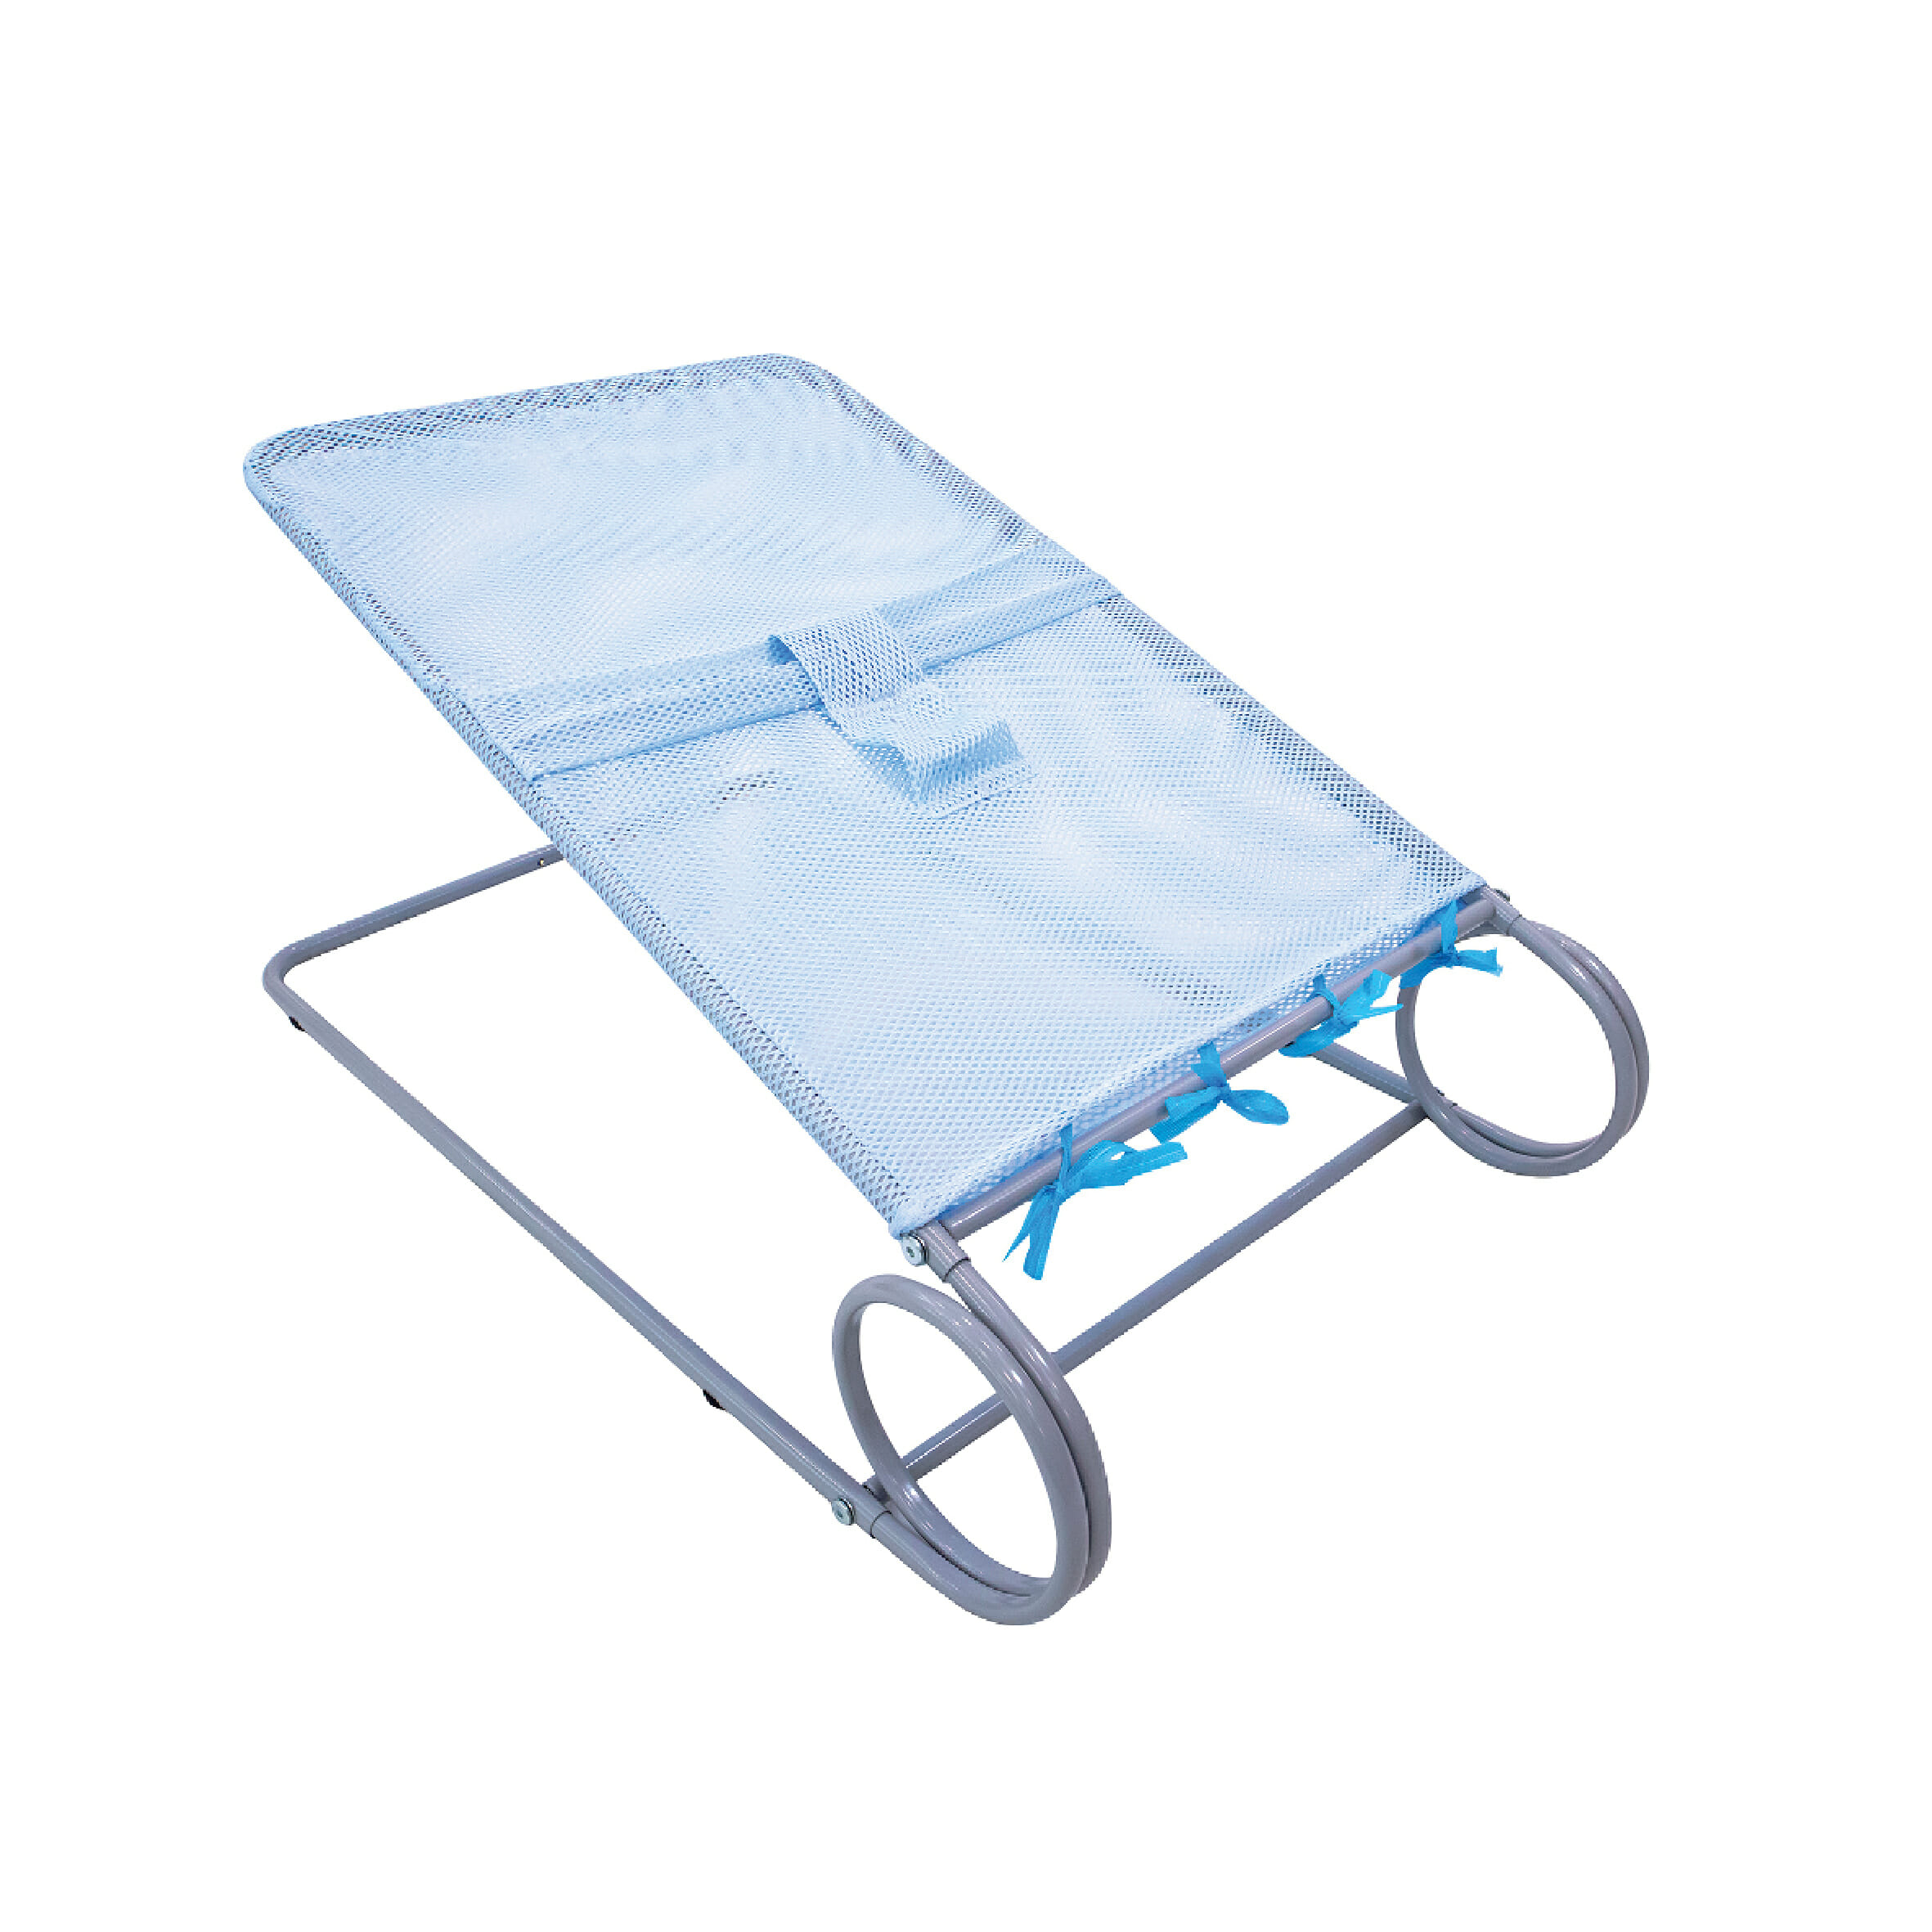 Babylove Compact Bouncer XL with Bouncer Net